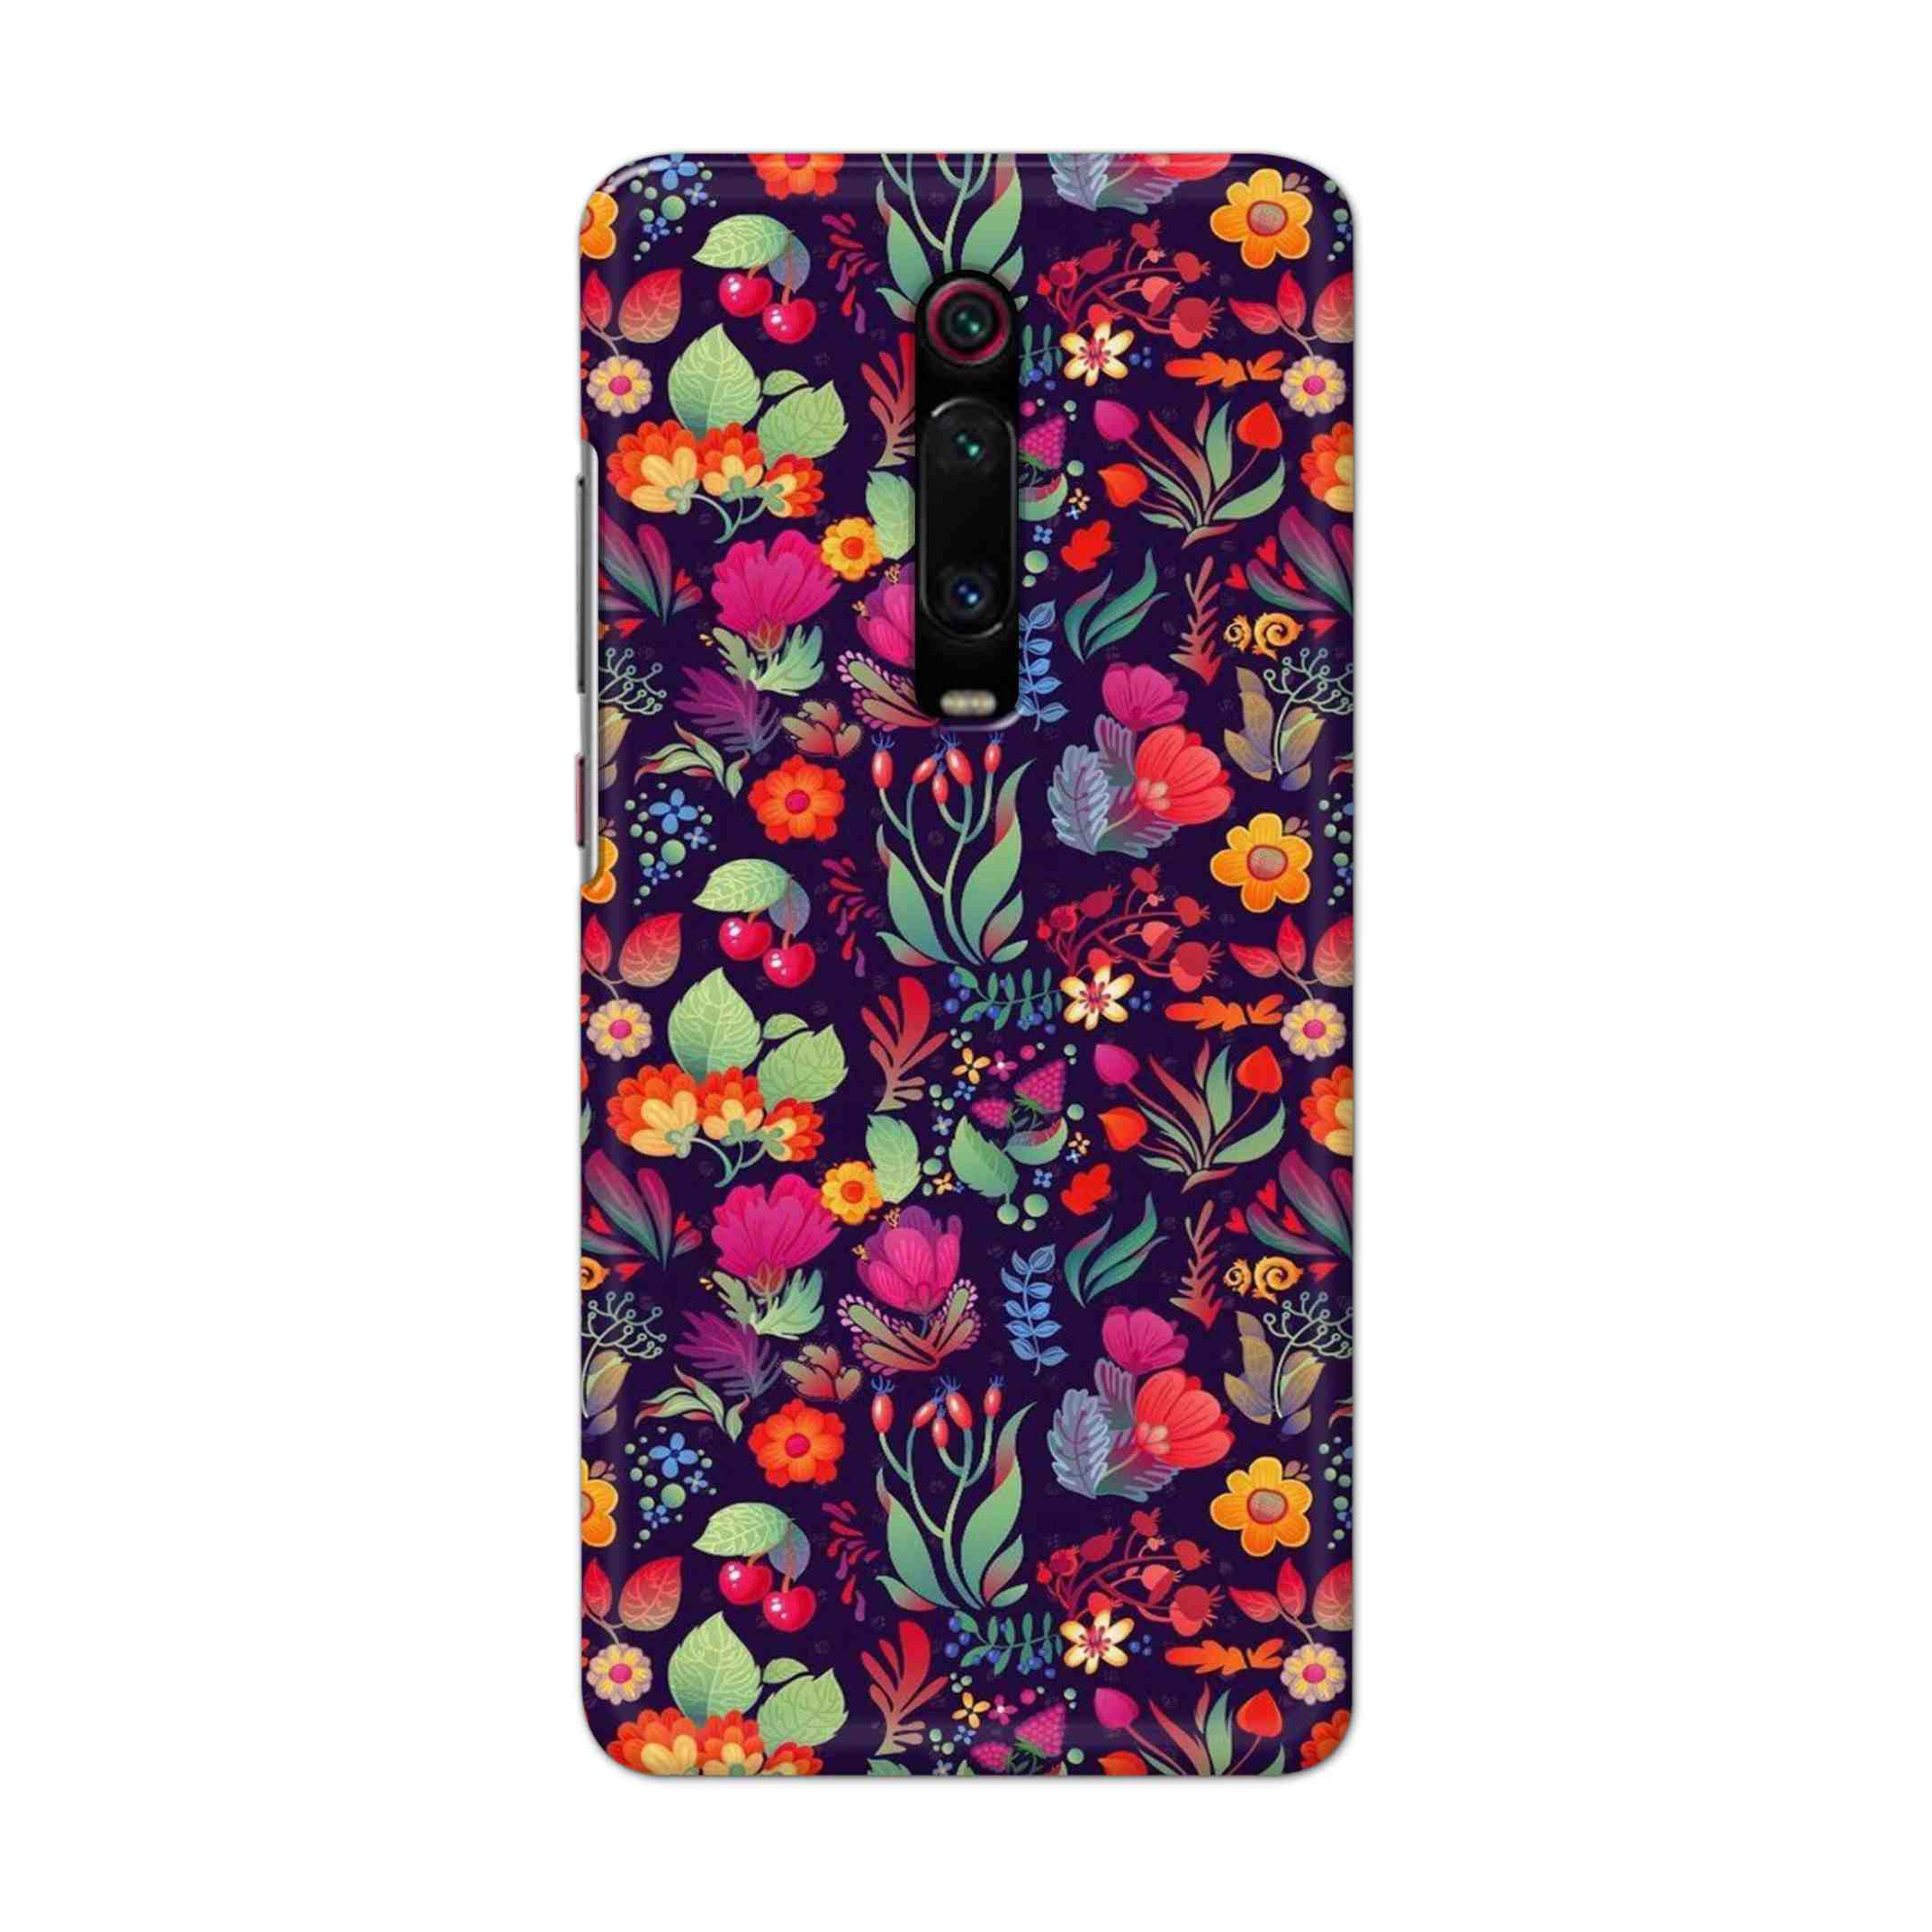 Buy Fruits Flower Hard Back Mobile Phone Case Cover For Xiaomi Redmi K20 Online